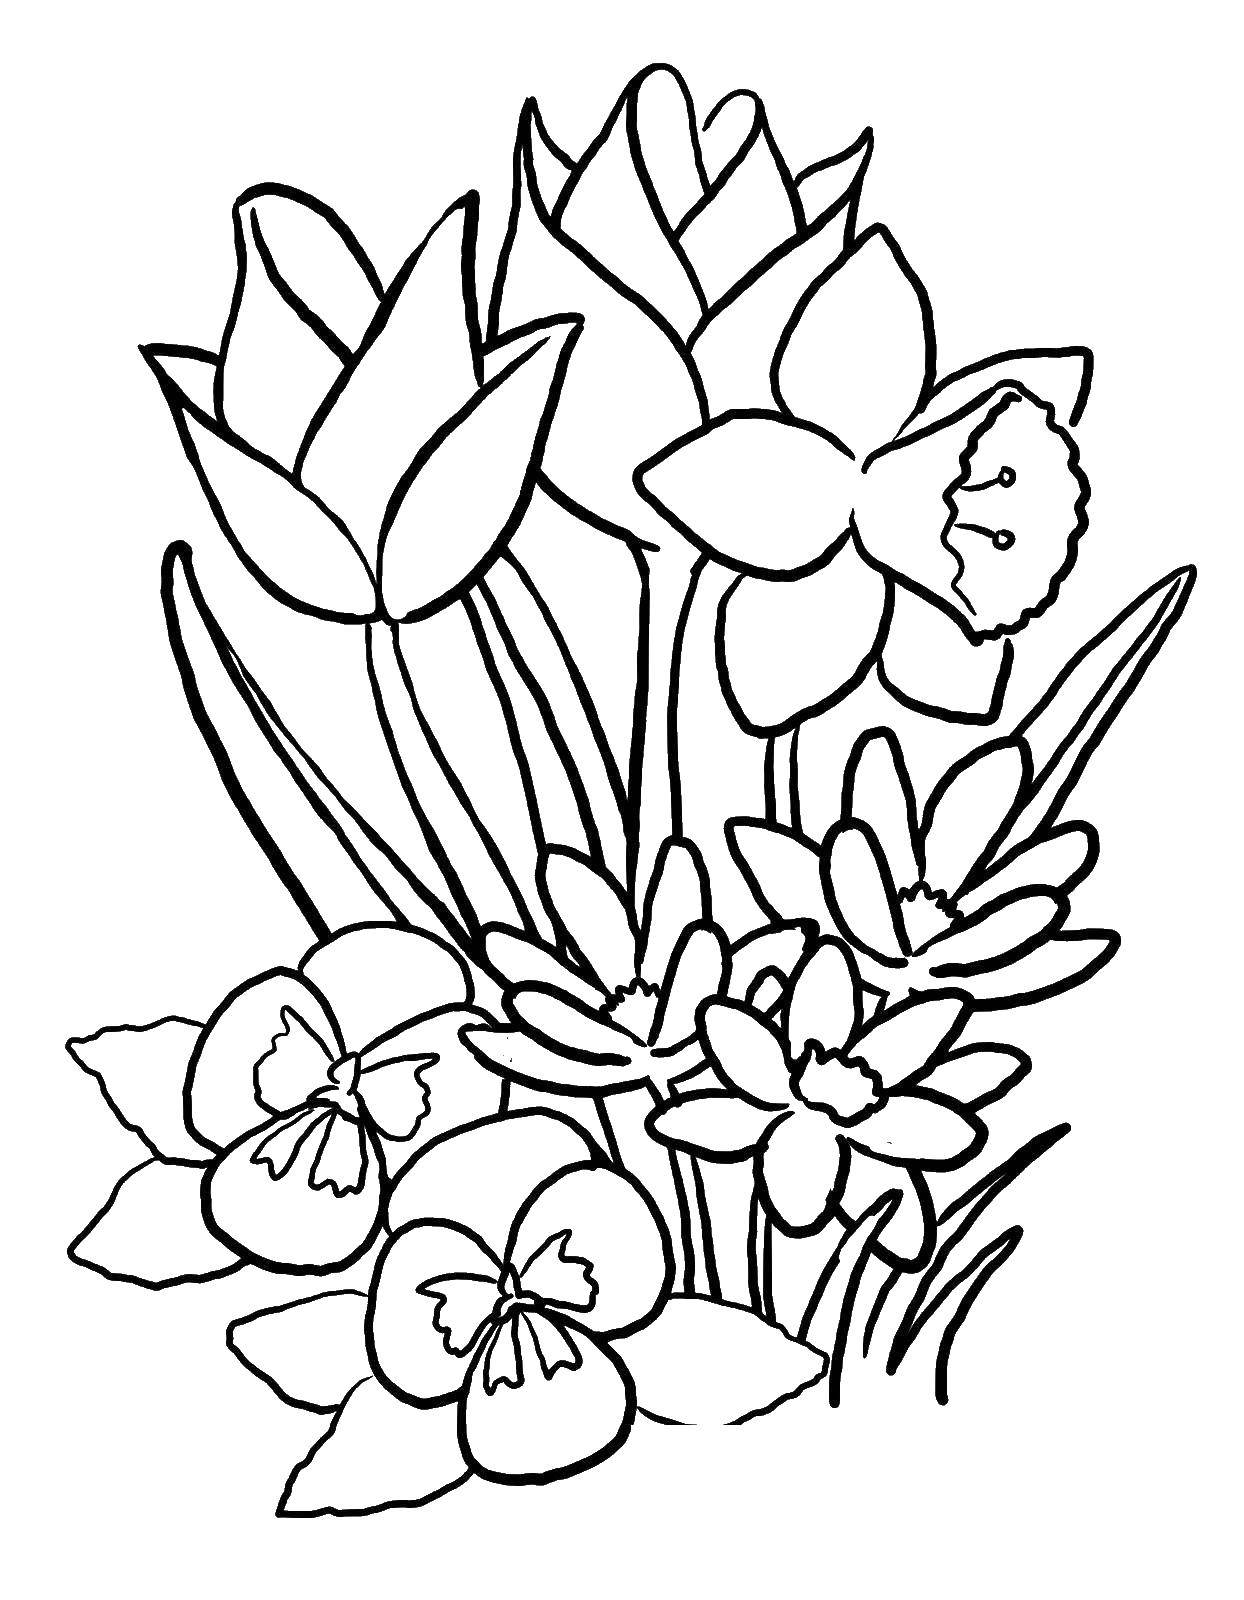 Coloring Flowers. Category Spring. Tags:  flowers.